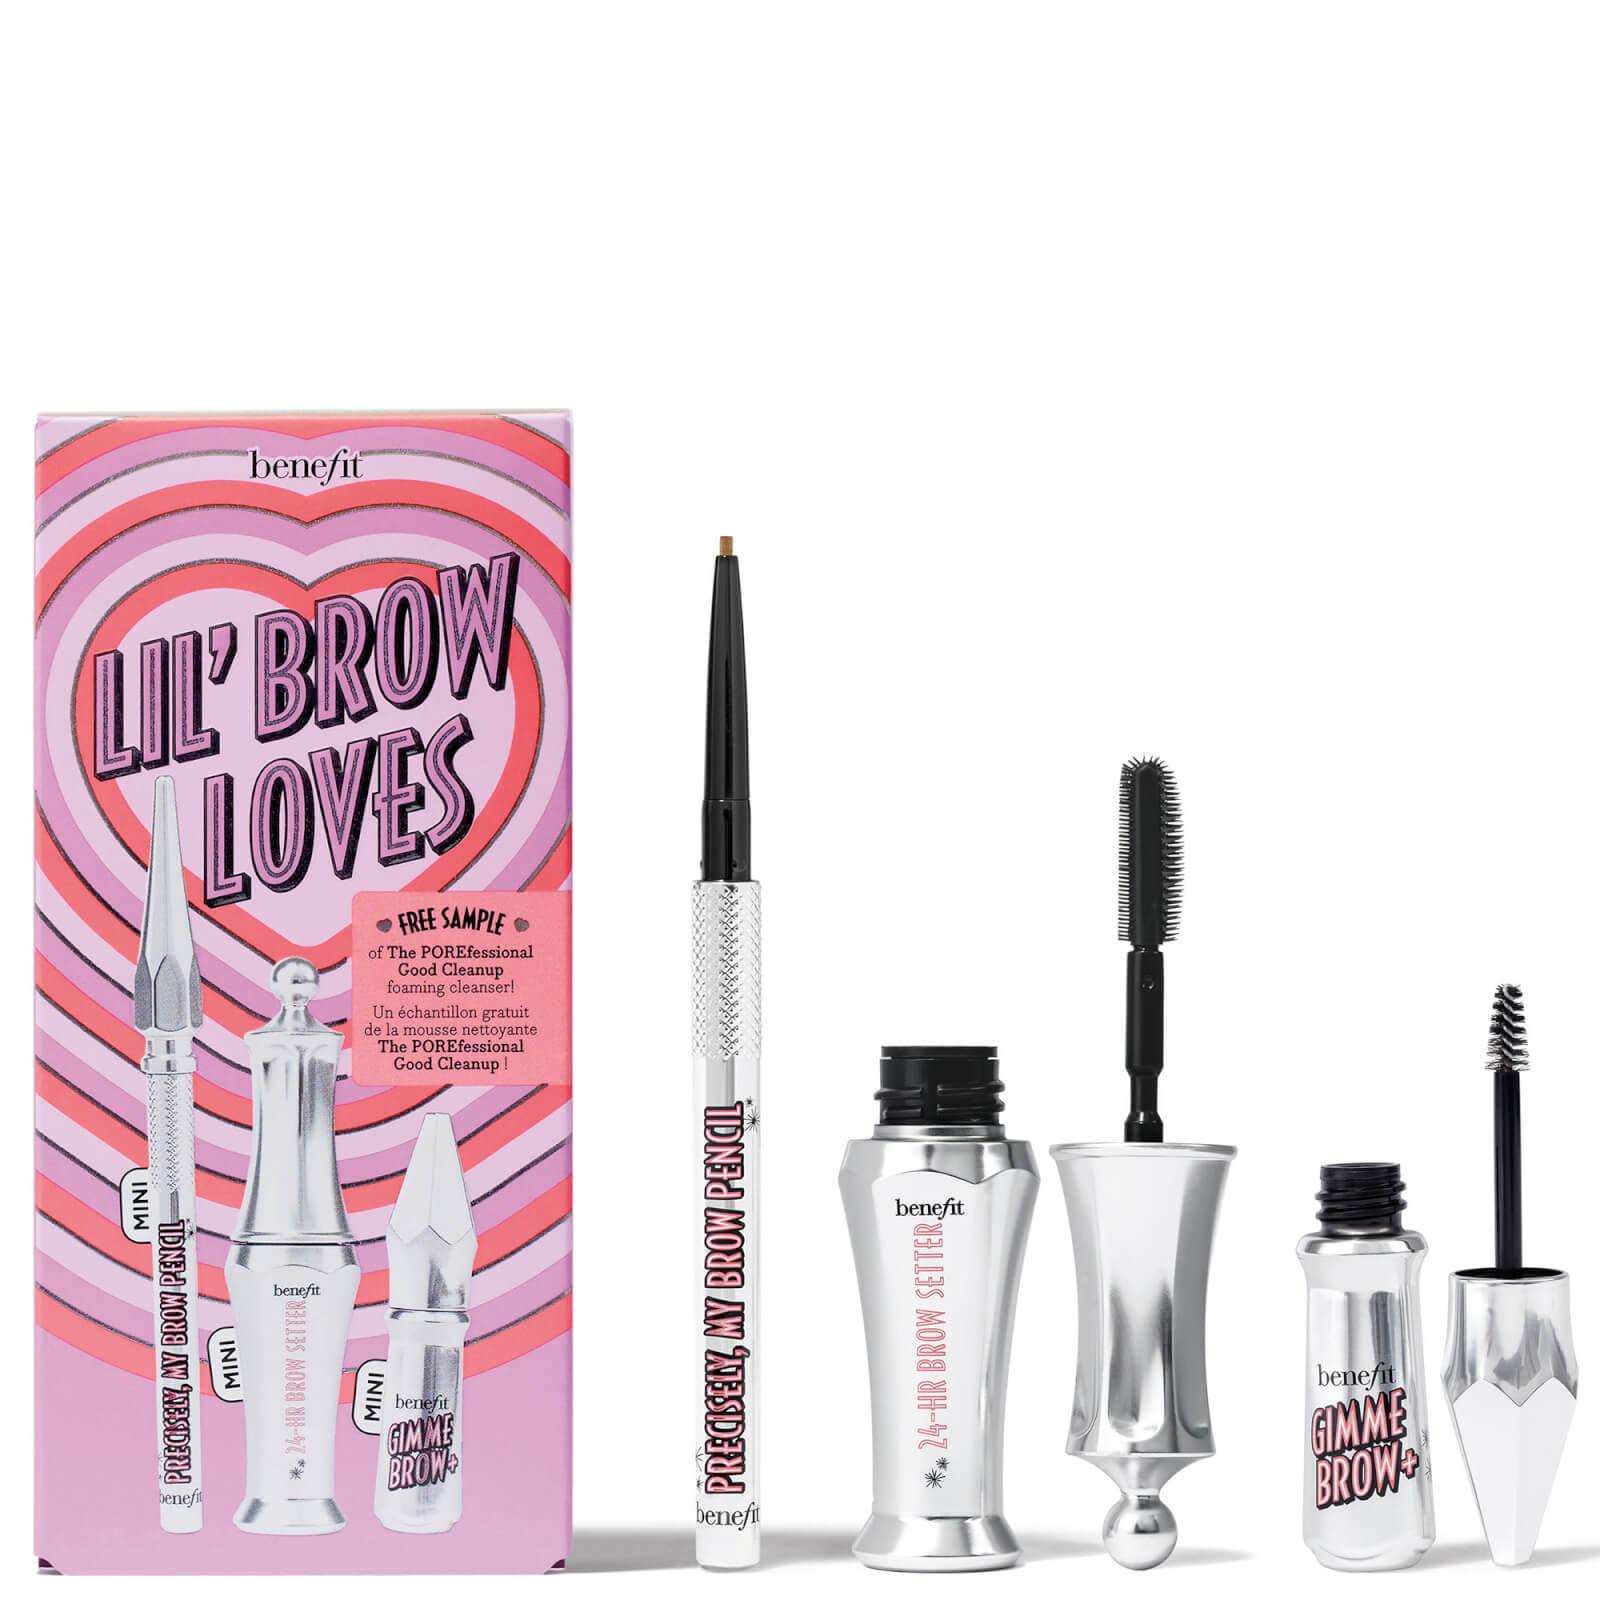 Benefit Lil' Brow Loves Mini Brow Set (Various Shades) - Shade 2 Warm Golden Blonde